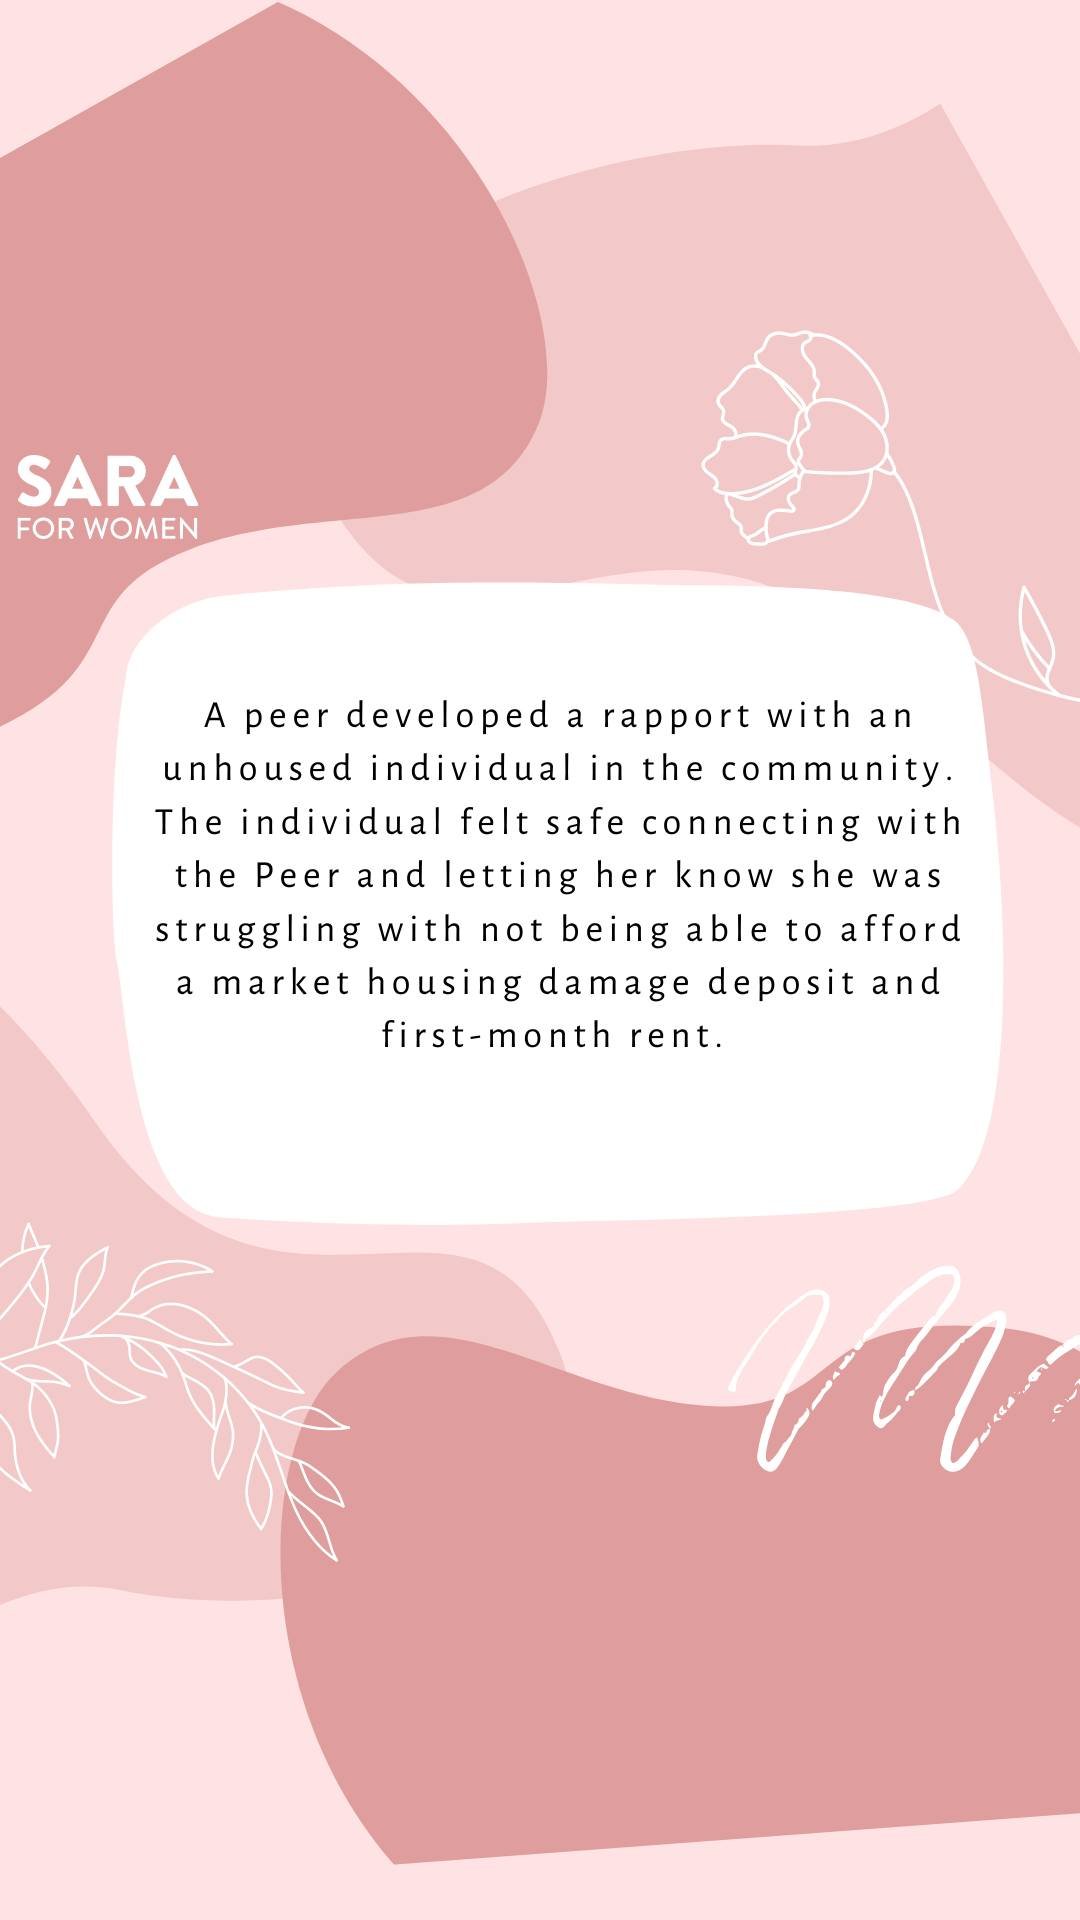 In this quarter,  A peer developed a rapport with an unhoused individual in the community. The individual felt safe connecting with the Peer and letting her know she was struggling with not being able to afford a market housing damage deposit and fir